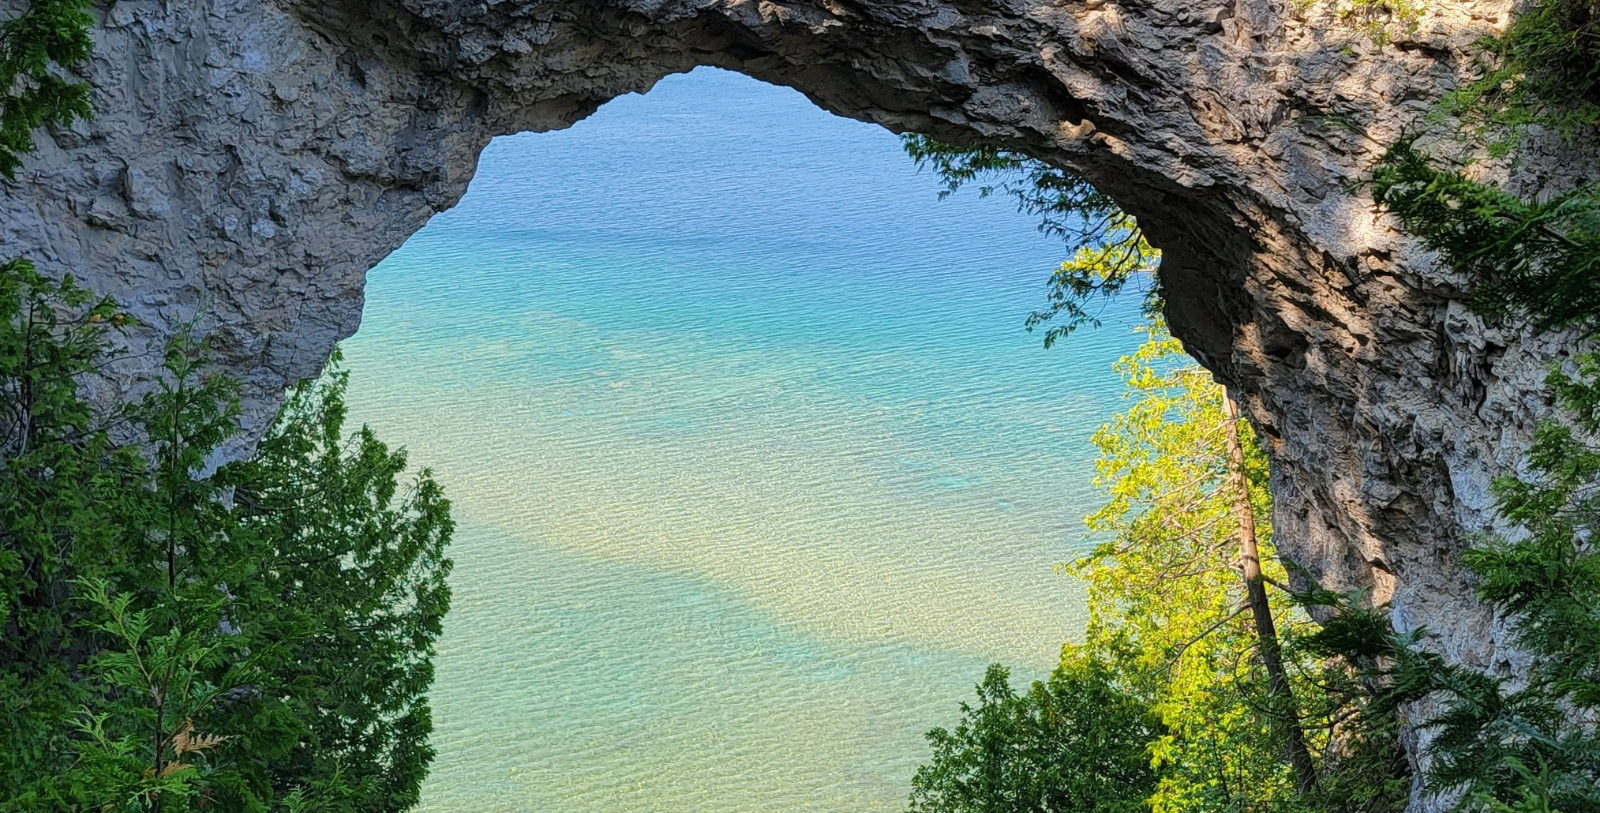 Explore ancient rock formations on Mackinac Island at Arch Rock.